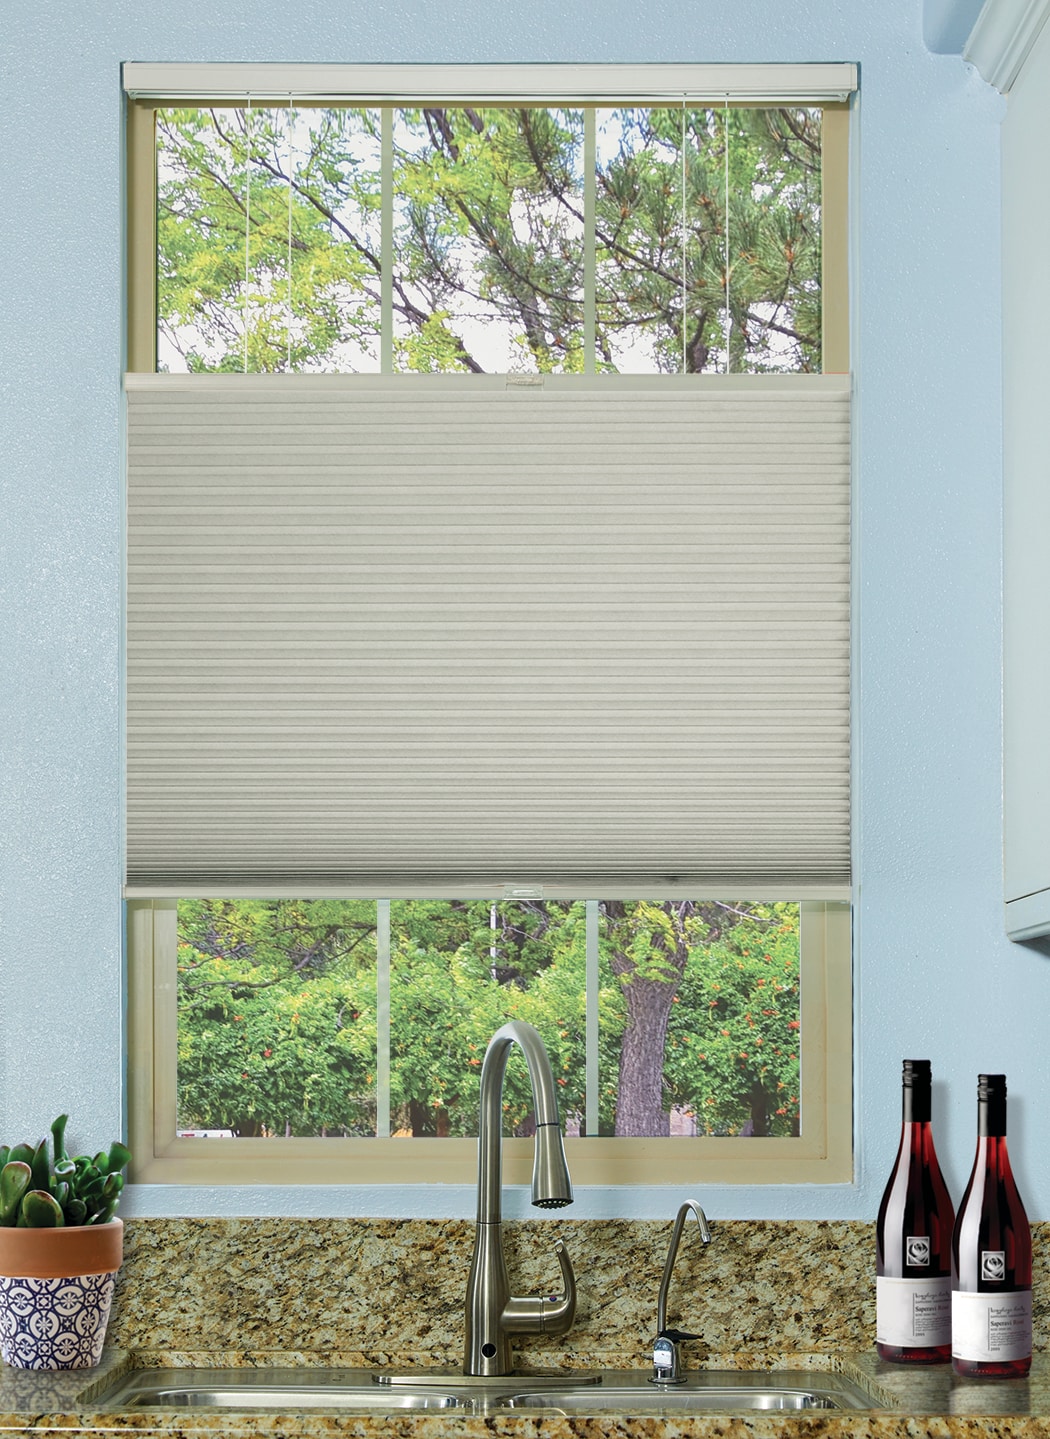 BlindsAvenue Cordless Top Down/Bottom Up Blackout Cellular Honeycomb Shade, 9/16 Single Cell, Winter White - 29 W x 48 H